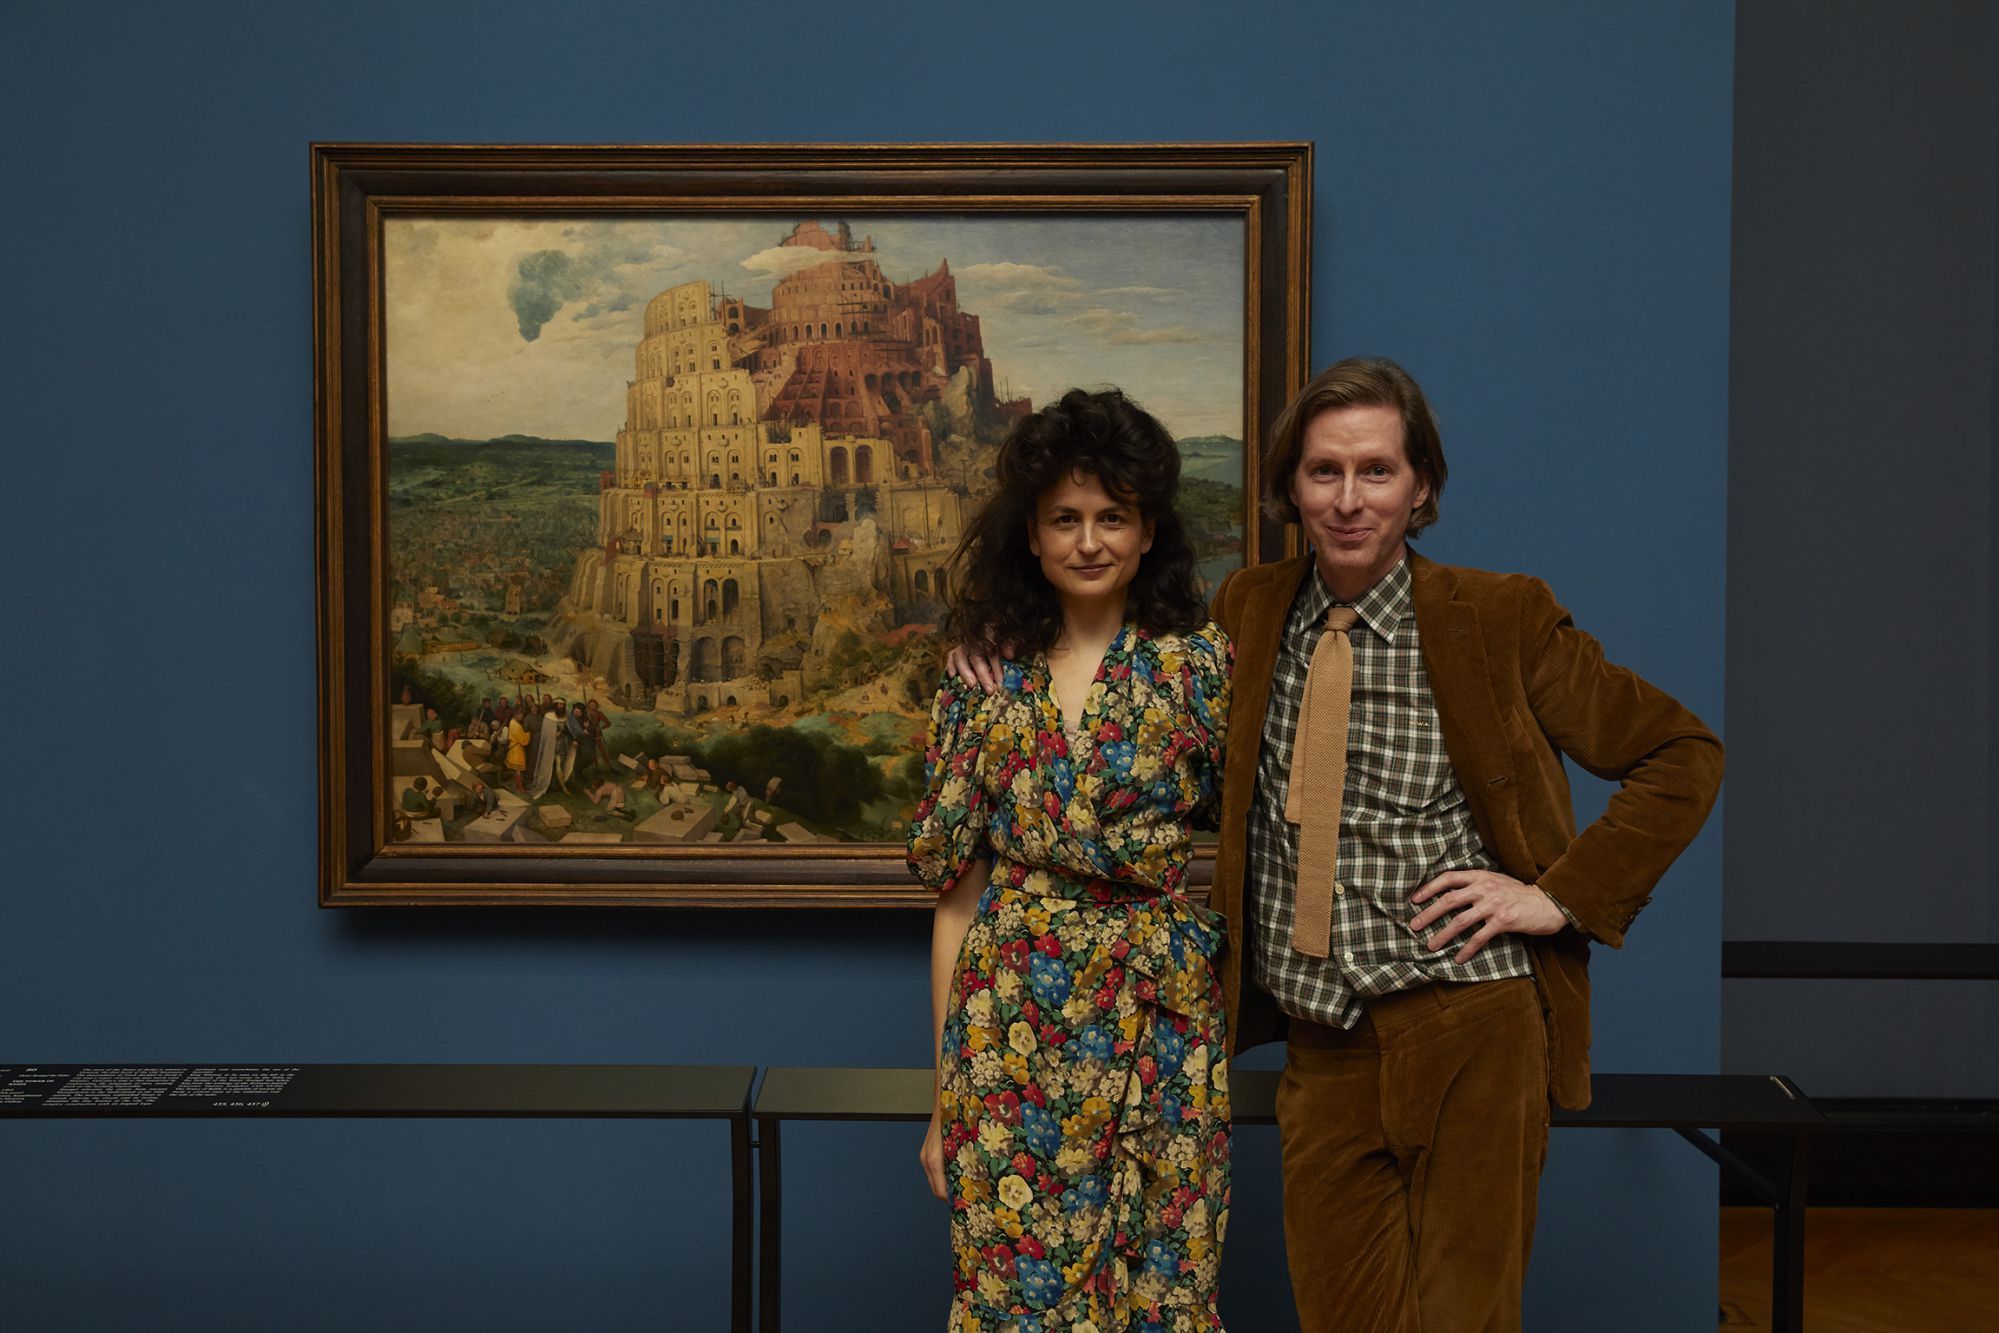 Wes Anderson and Juman Malouf to exhibit in Milan At the Fondazione Prada from 20th September 2019 to 13th January 2020